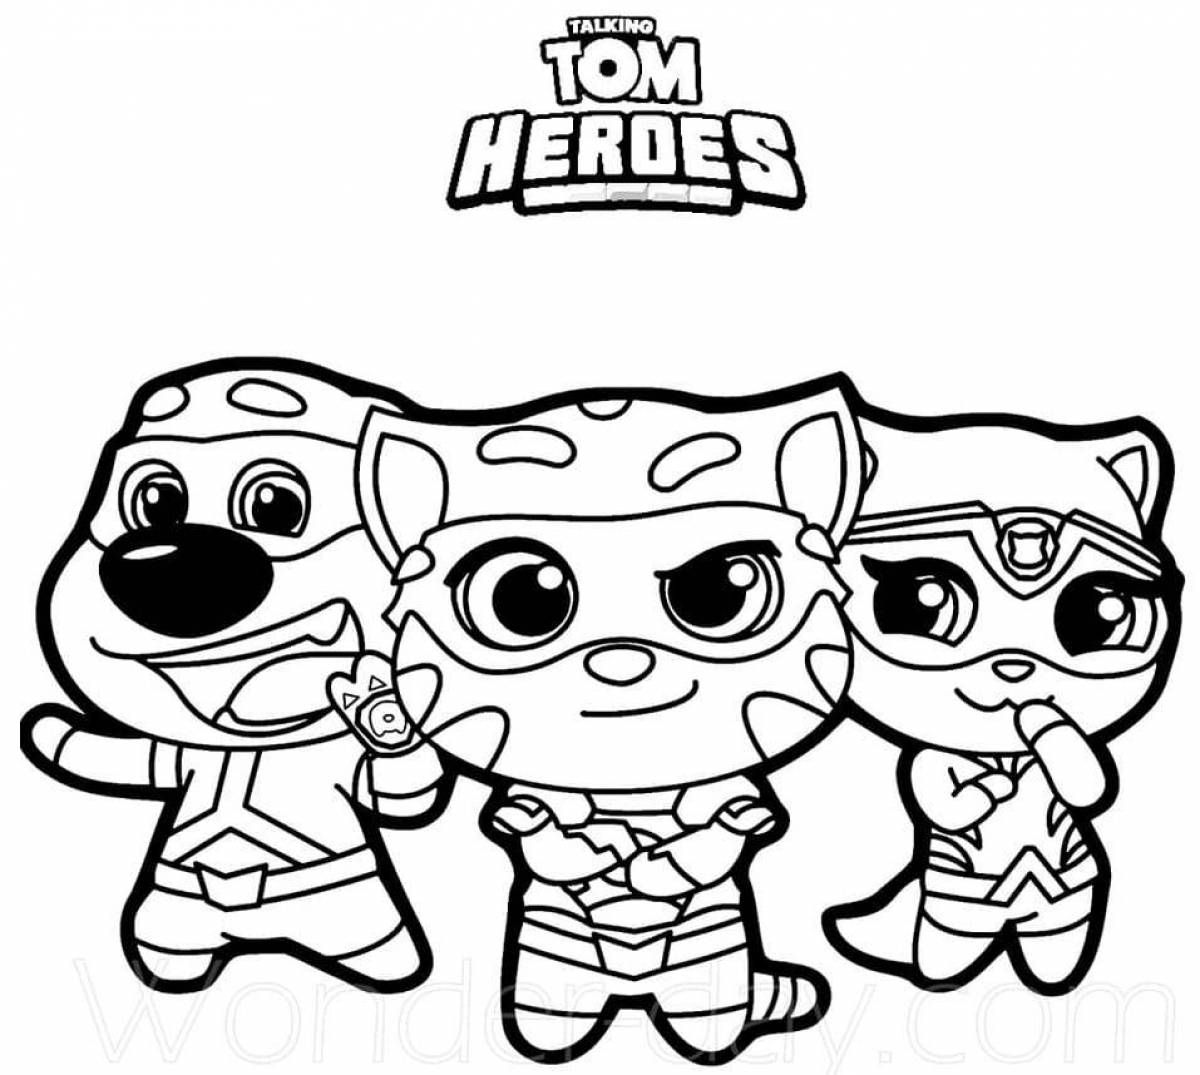 Glittering tom hero coloring page